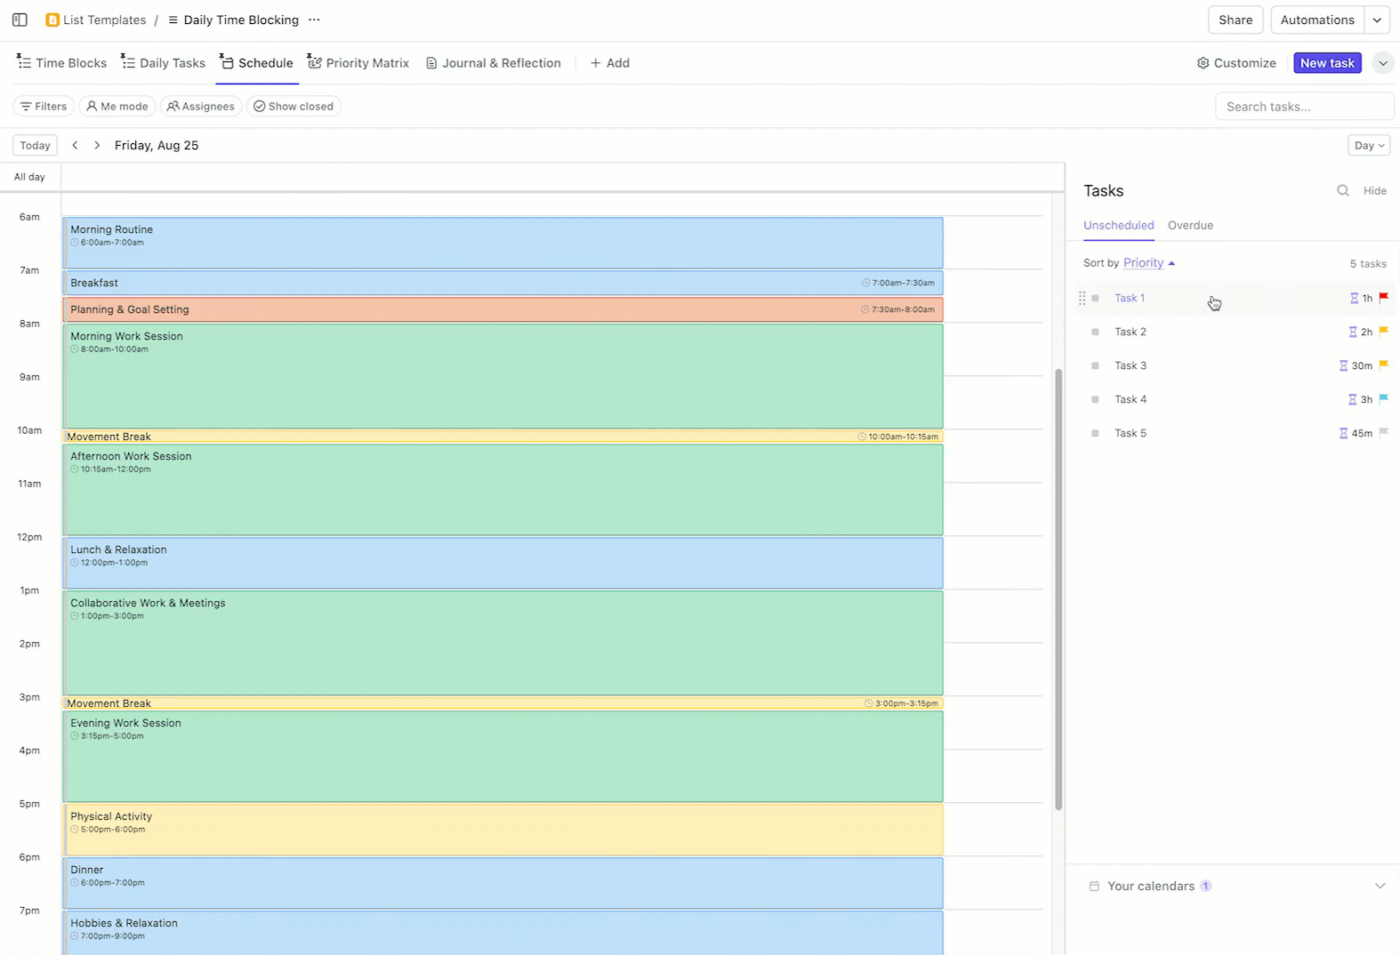 ClickUp Daily Time Blocking Template showing color-coded daily tasks in the platform